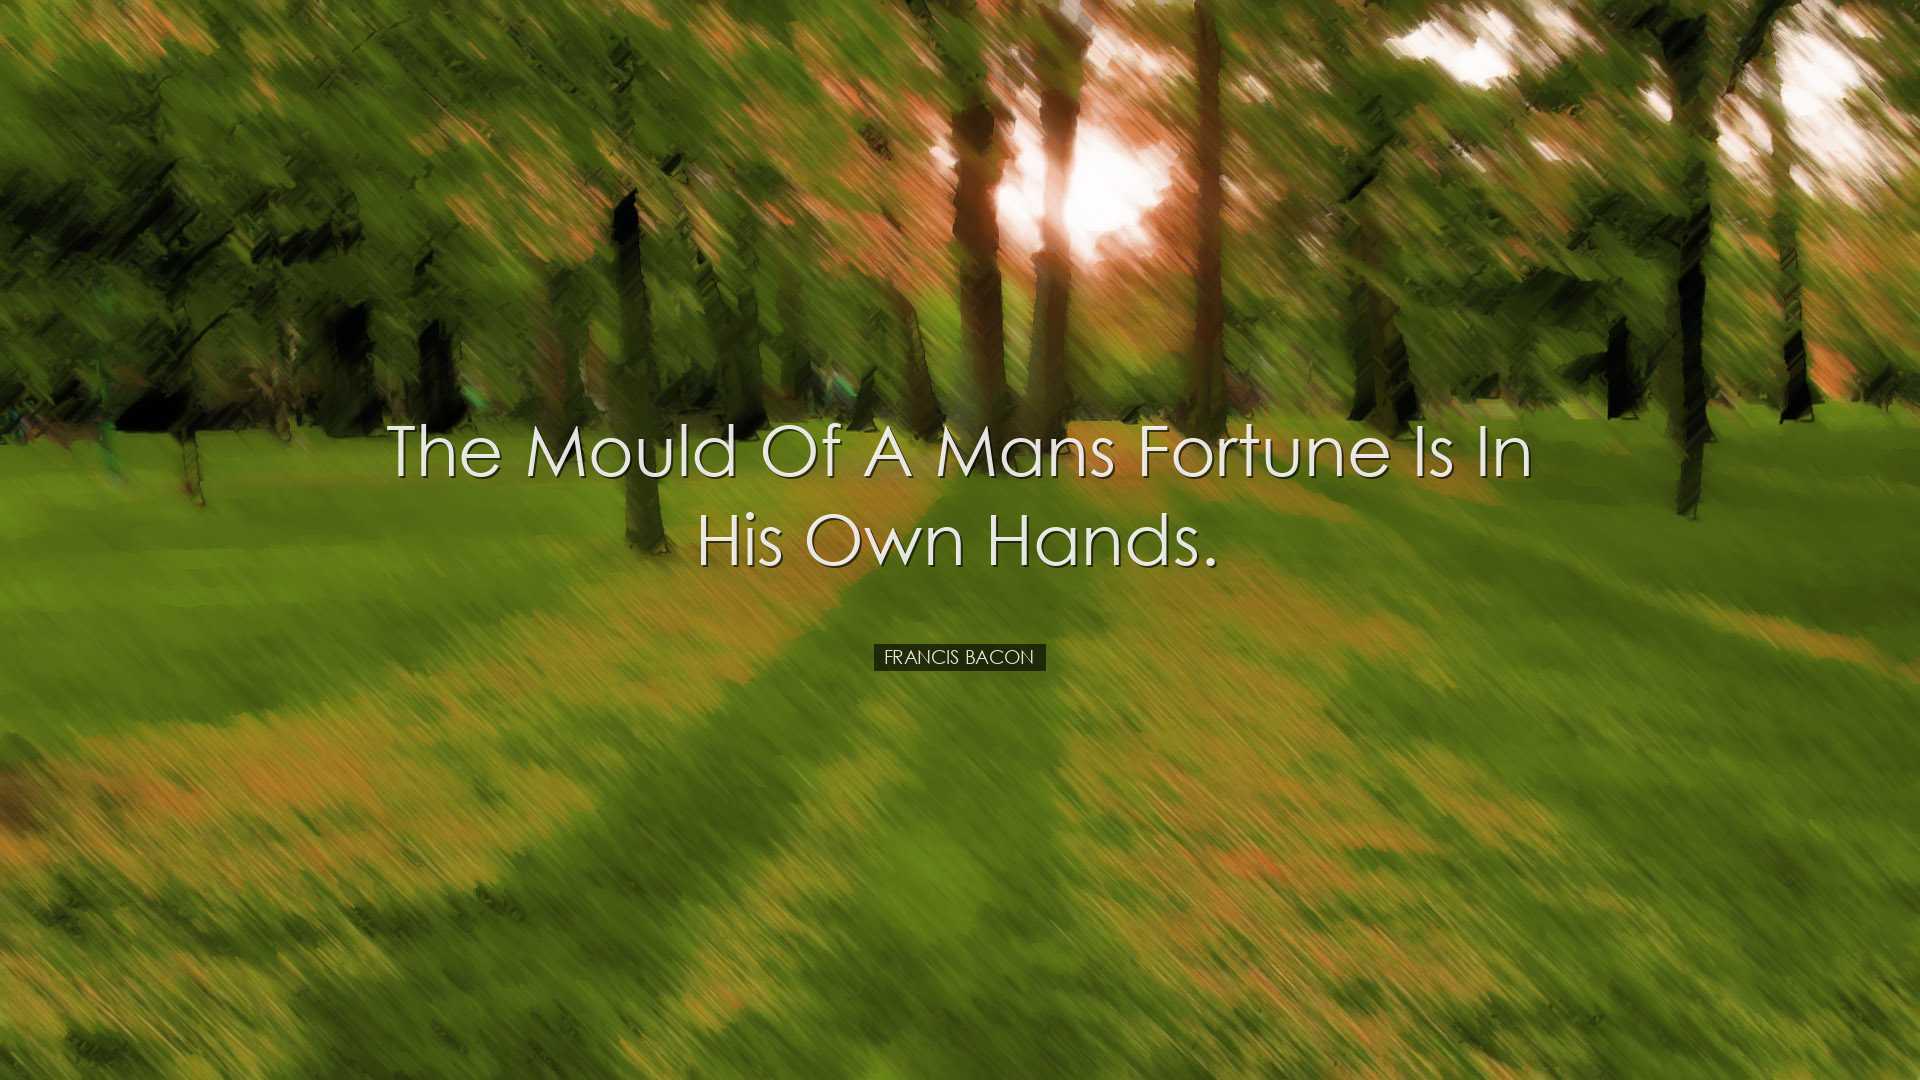 The mould of a mans fortune is in his own hands. - Francis Bacon